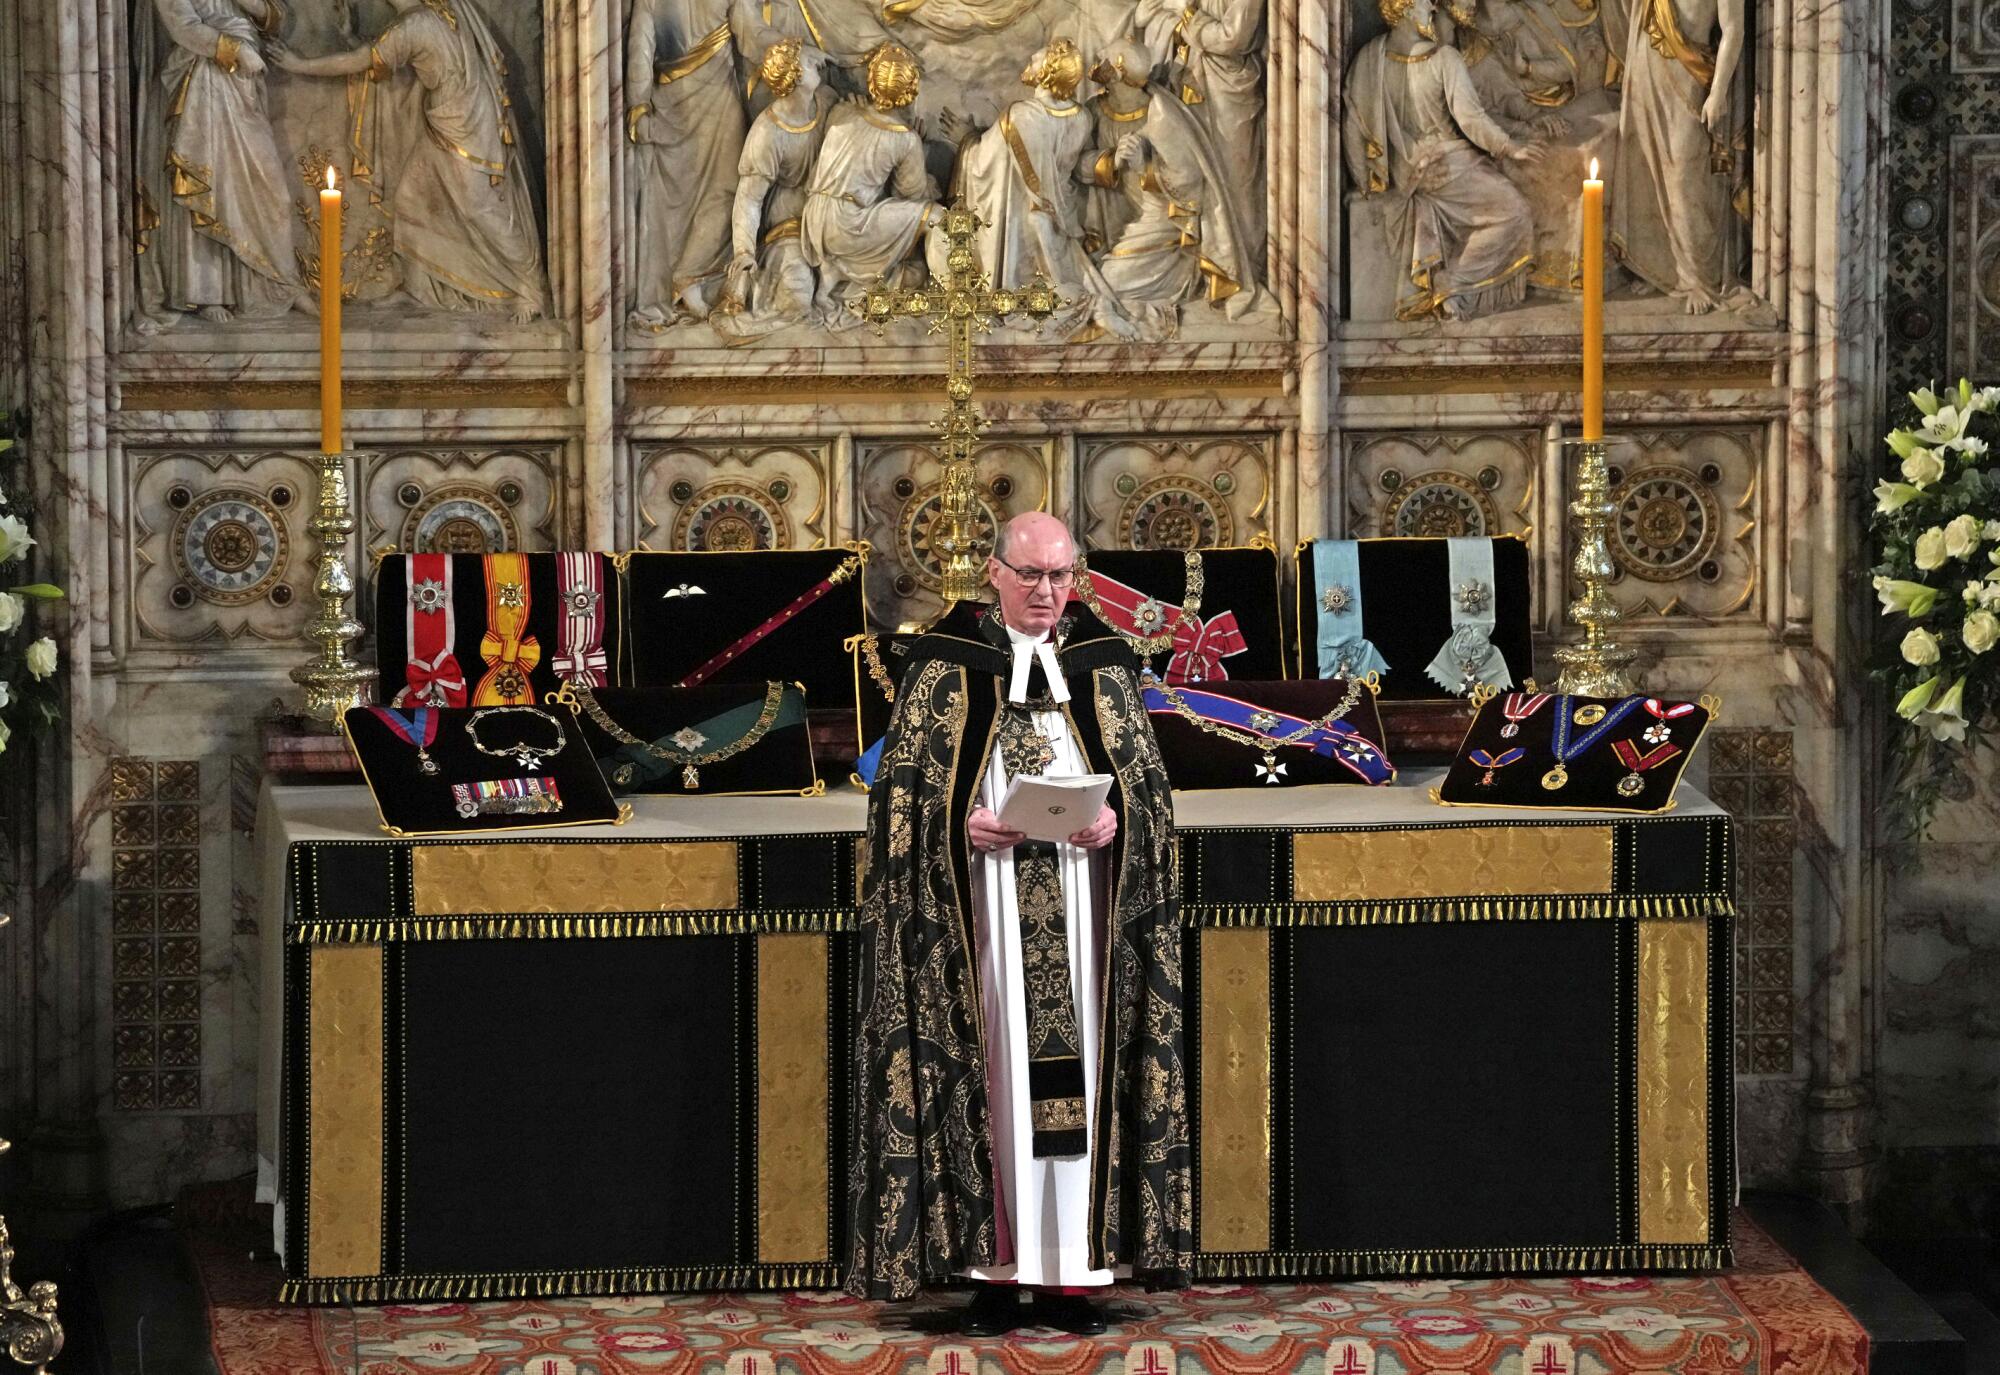 David Conner, Dean of Windsor, stands in front of an altar covered with Prince Philip's insignias.